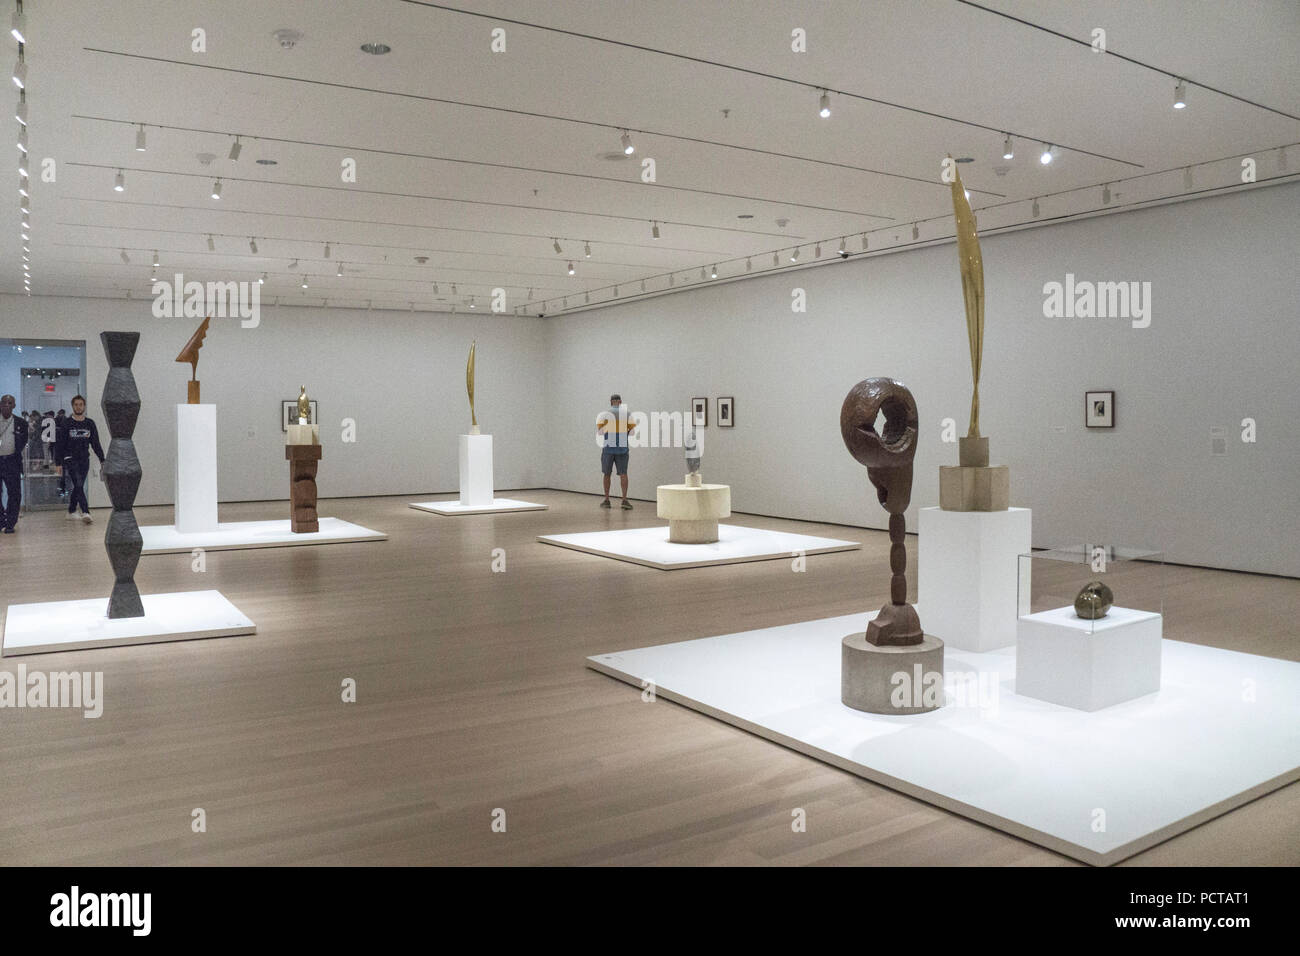 installation of small exhibition Constantin Brancusi sculpture Museum of Modern Art New York curated from MoMA Brancusi holdings closing Feb 18 2019 Stock Photo